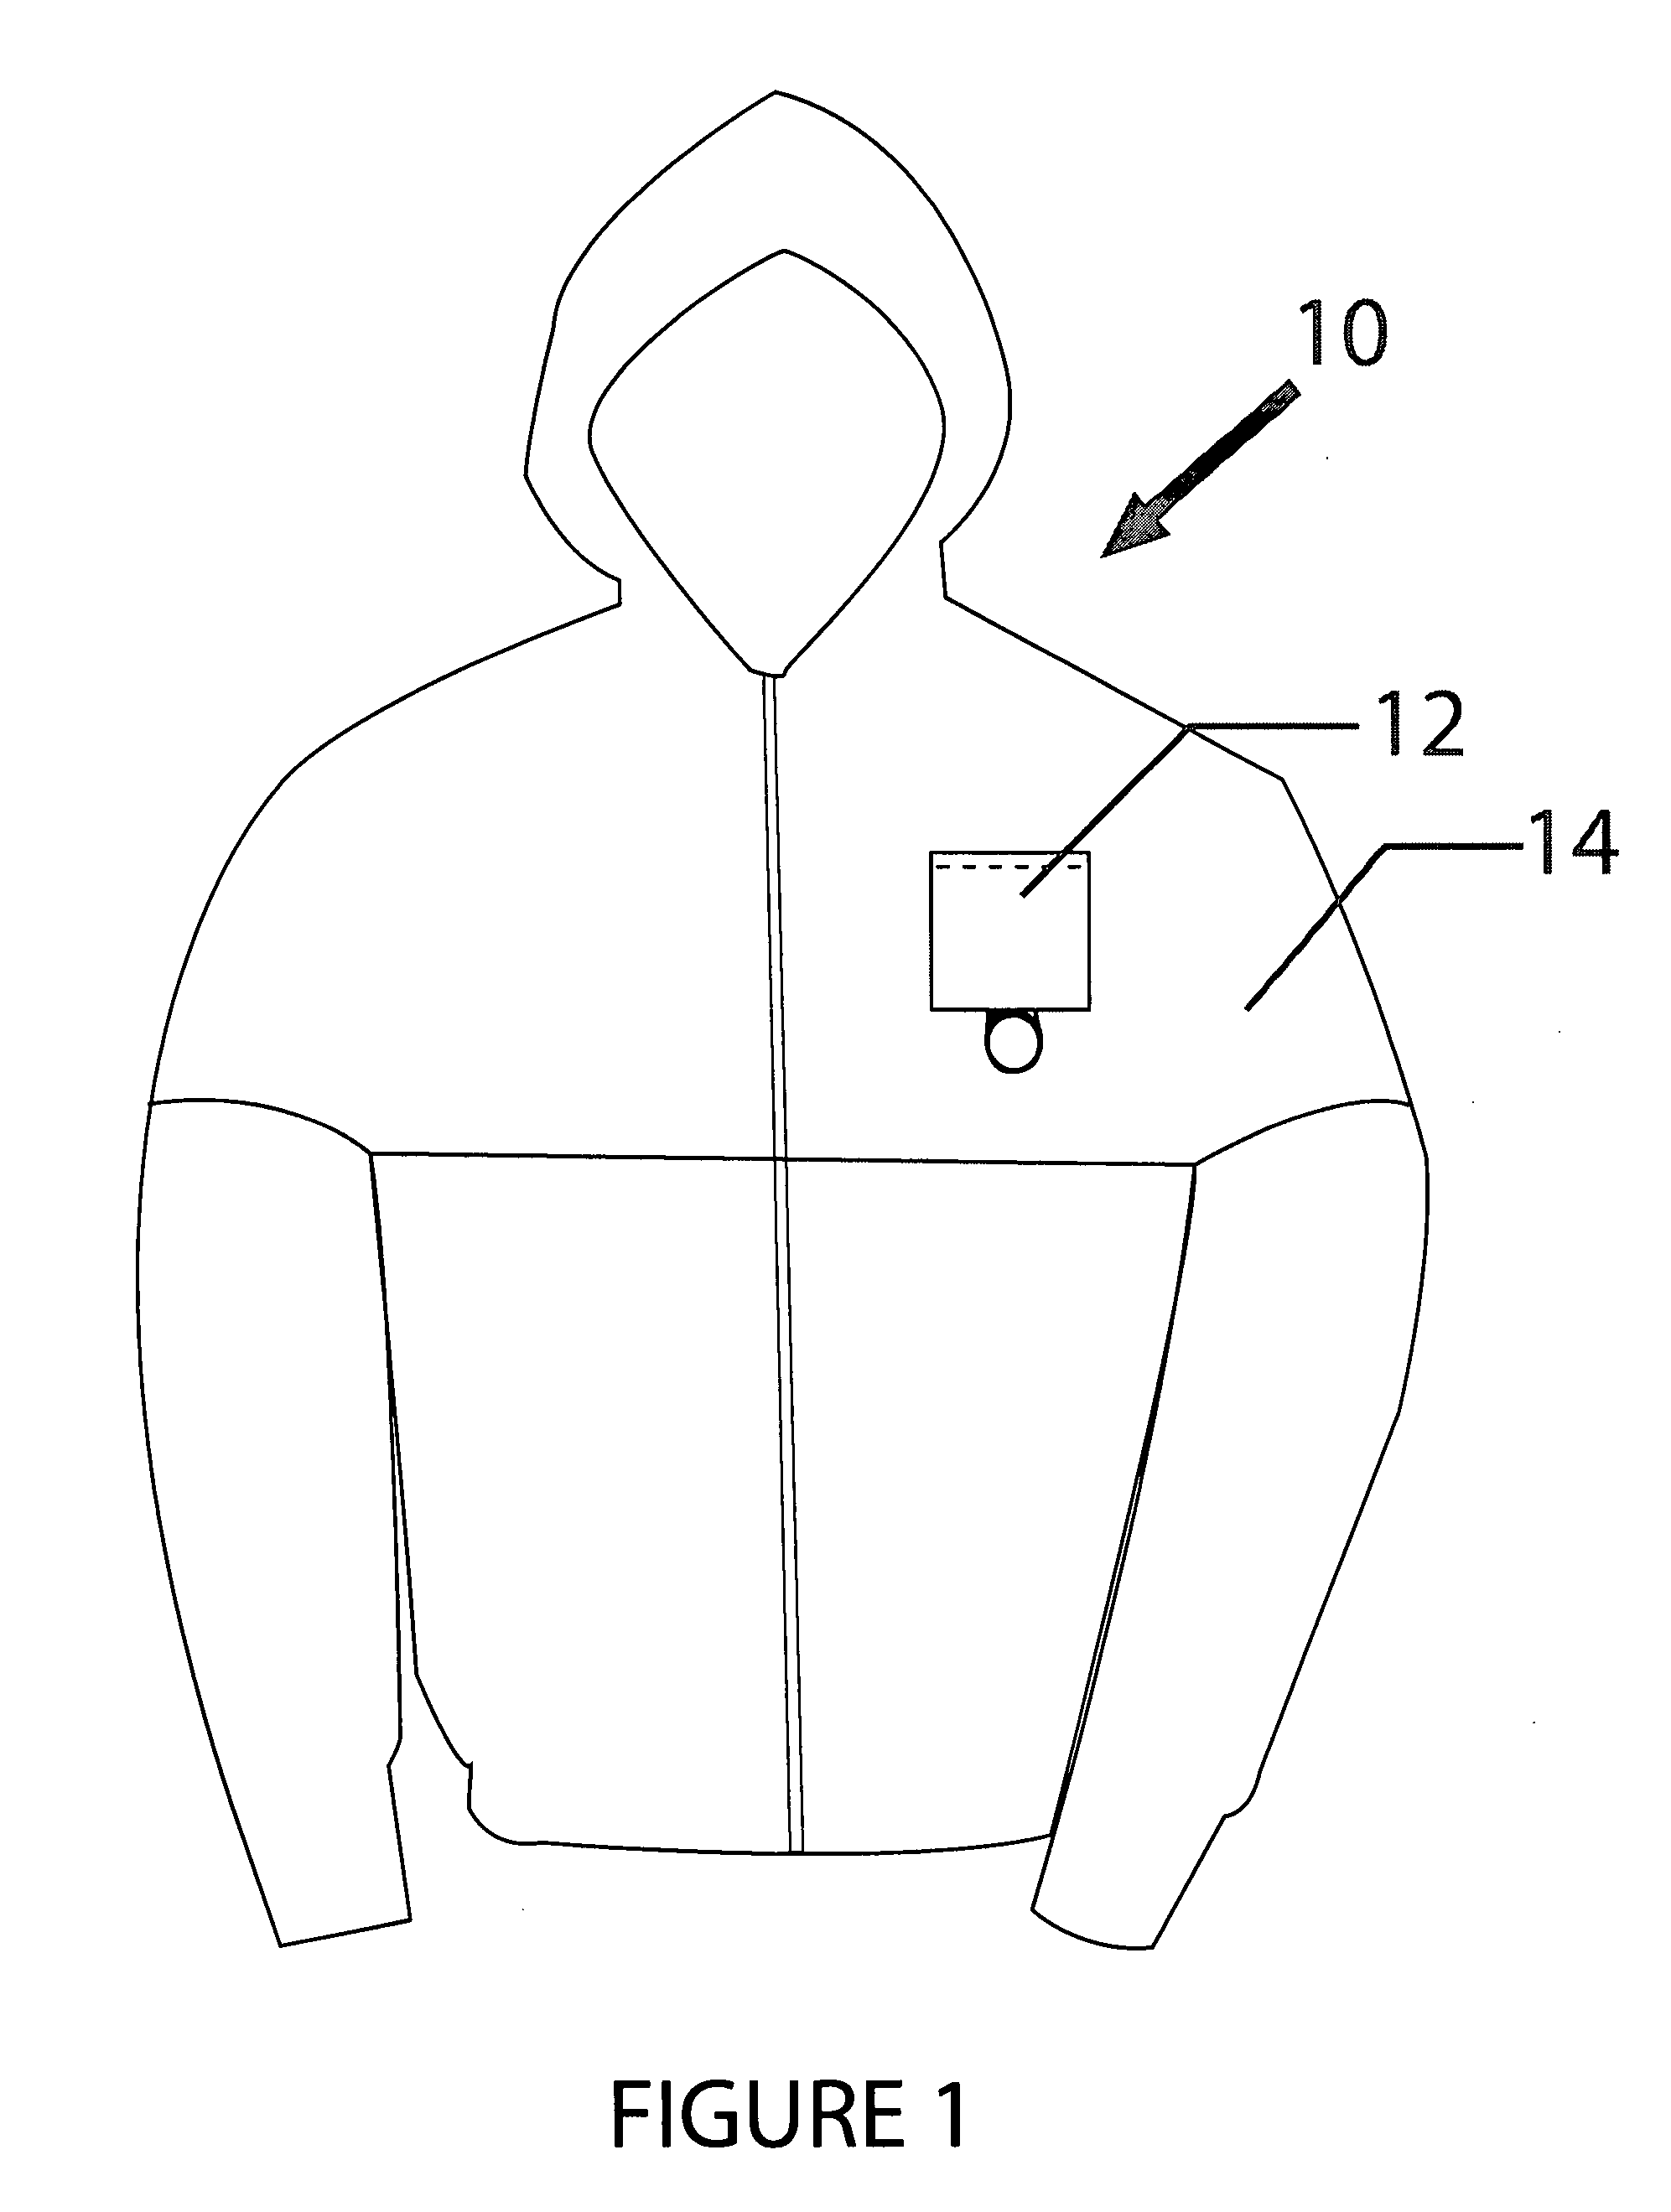 Garment design for use with knife